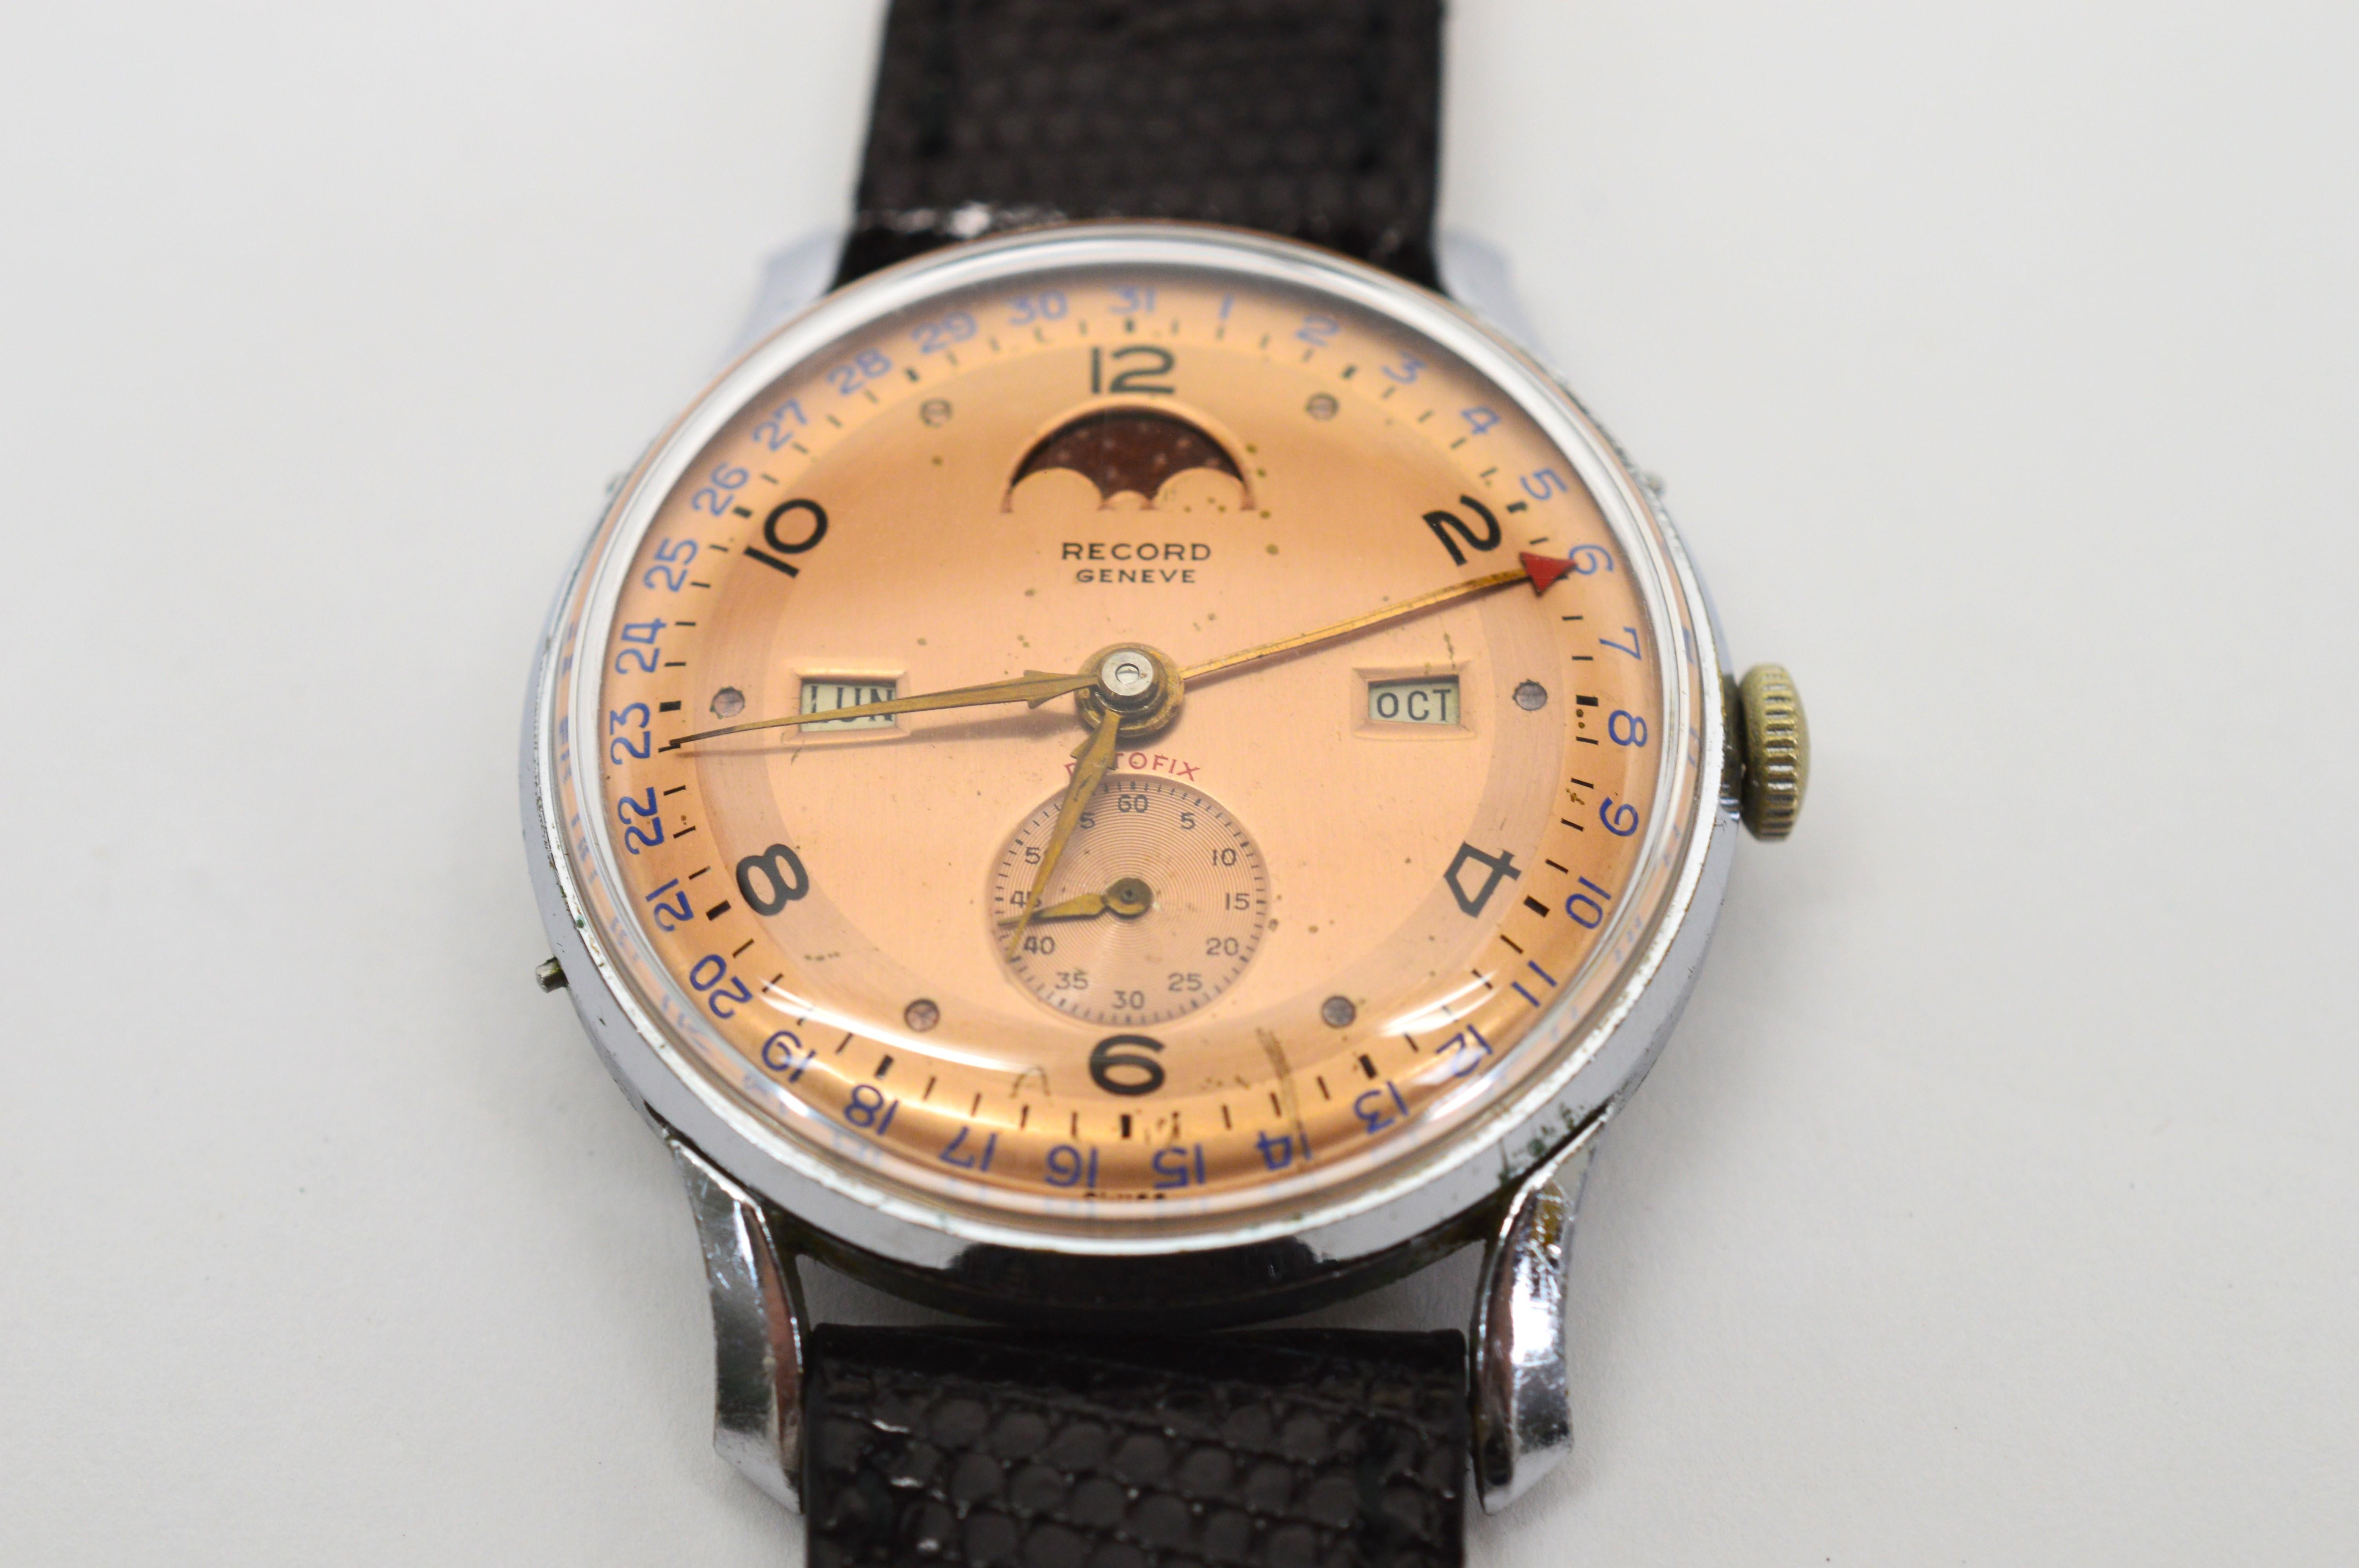 Fabulous mid-century Record Watch Company Datafix Triple Date Moon Phase Cal 107C Reference 257. Steel Men's watch in Acier Case #13321, size 35mm, with an attractive copper color face. Arabic numerals indicate time on even numbers.  Features